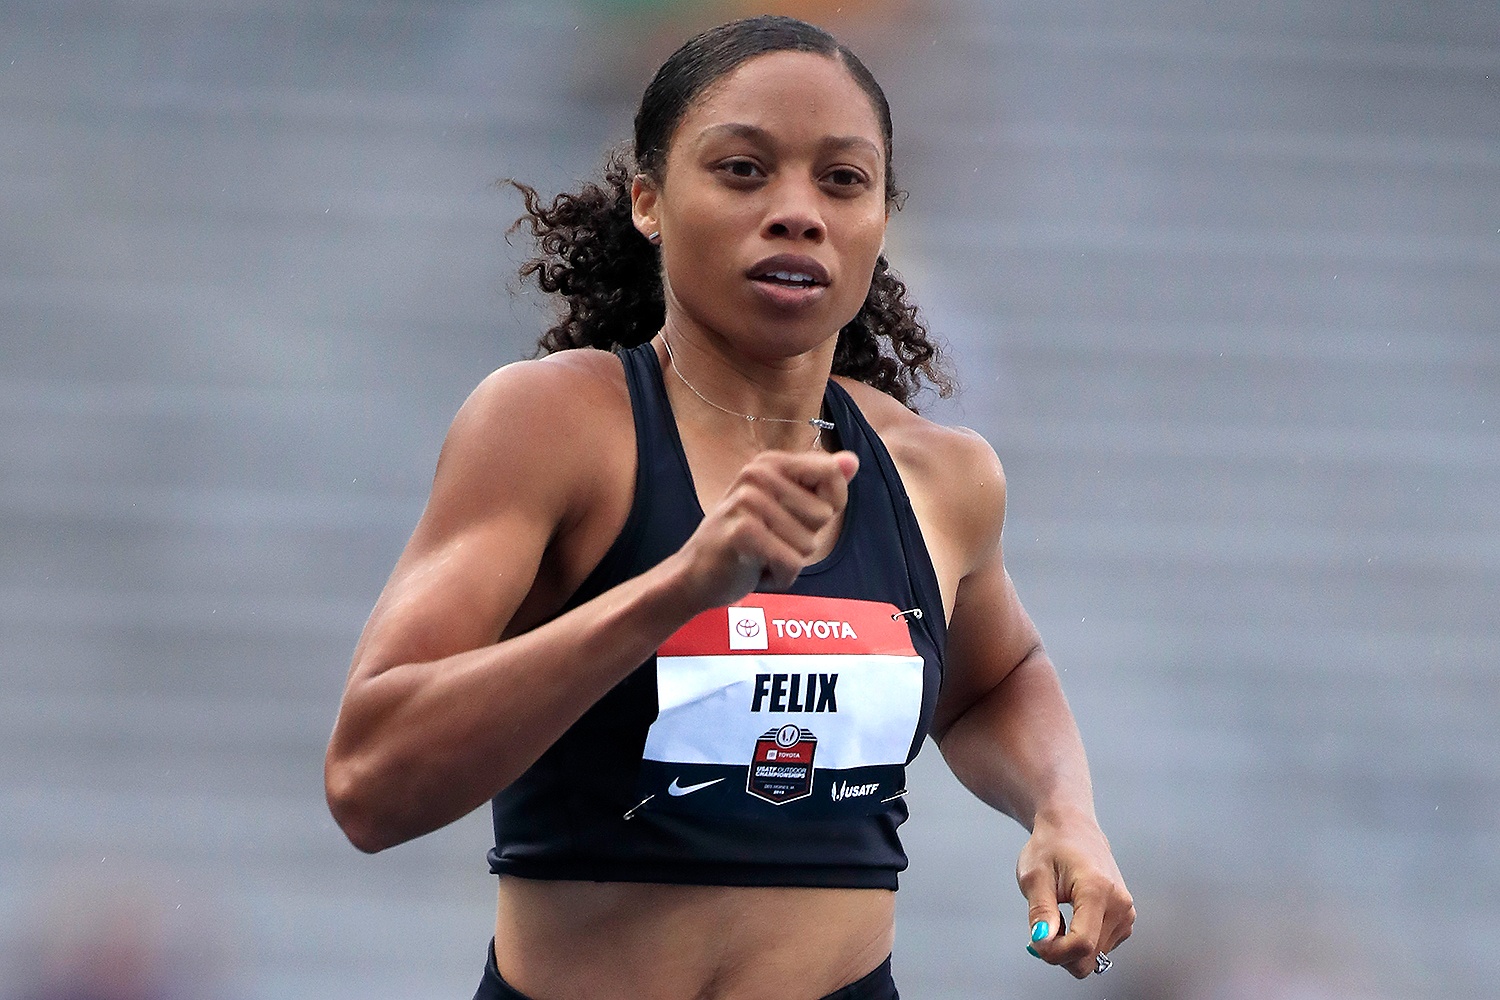 Allyson Felix was the first athlete to dump Nike for the Gap